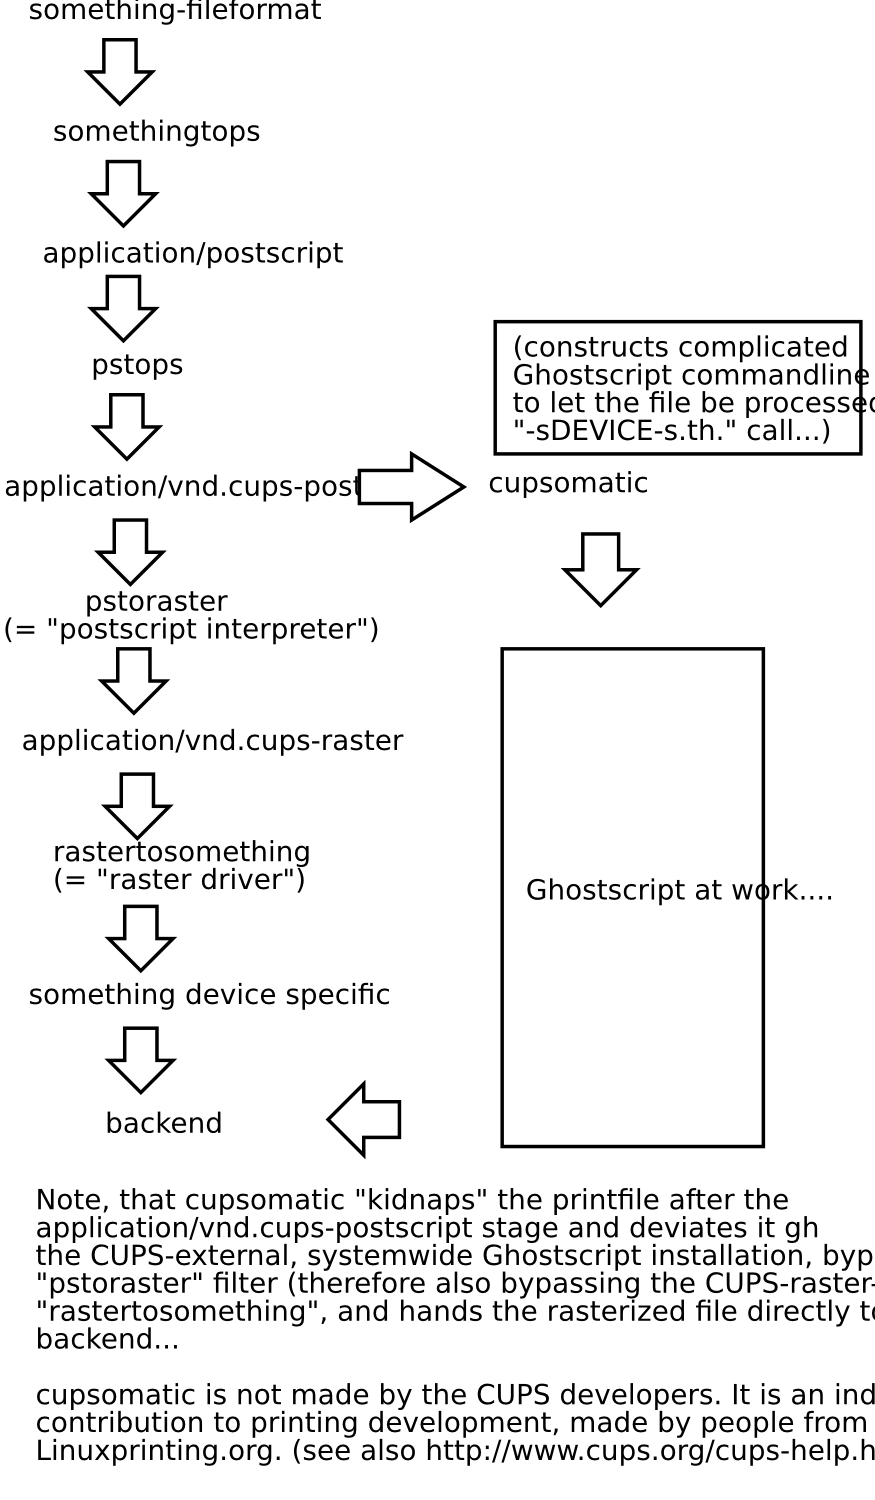 Filtering Chain with cupsomatic